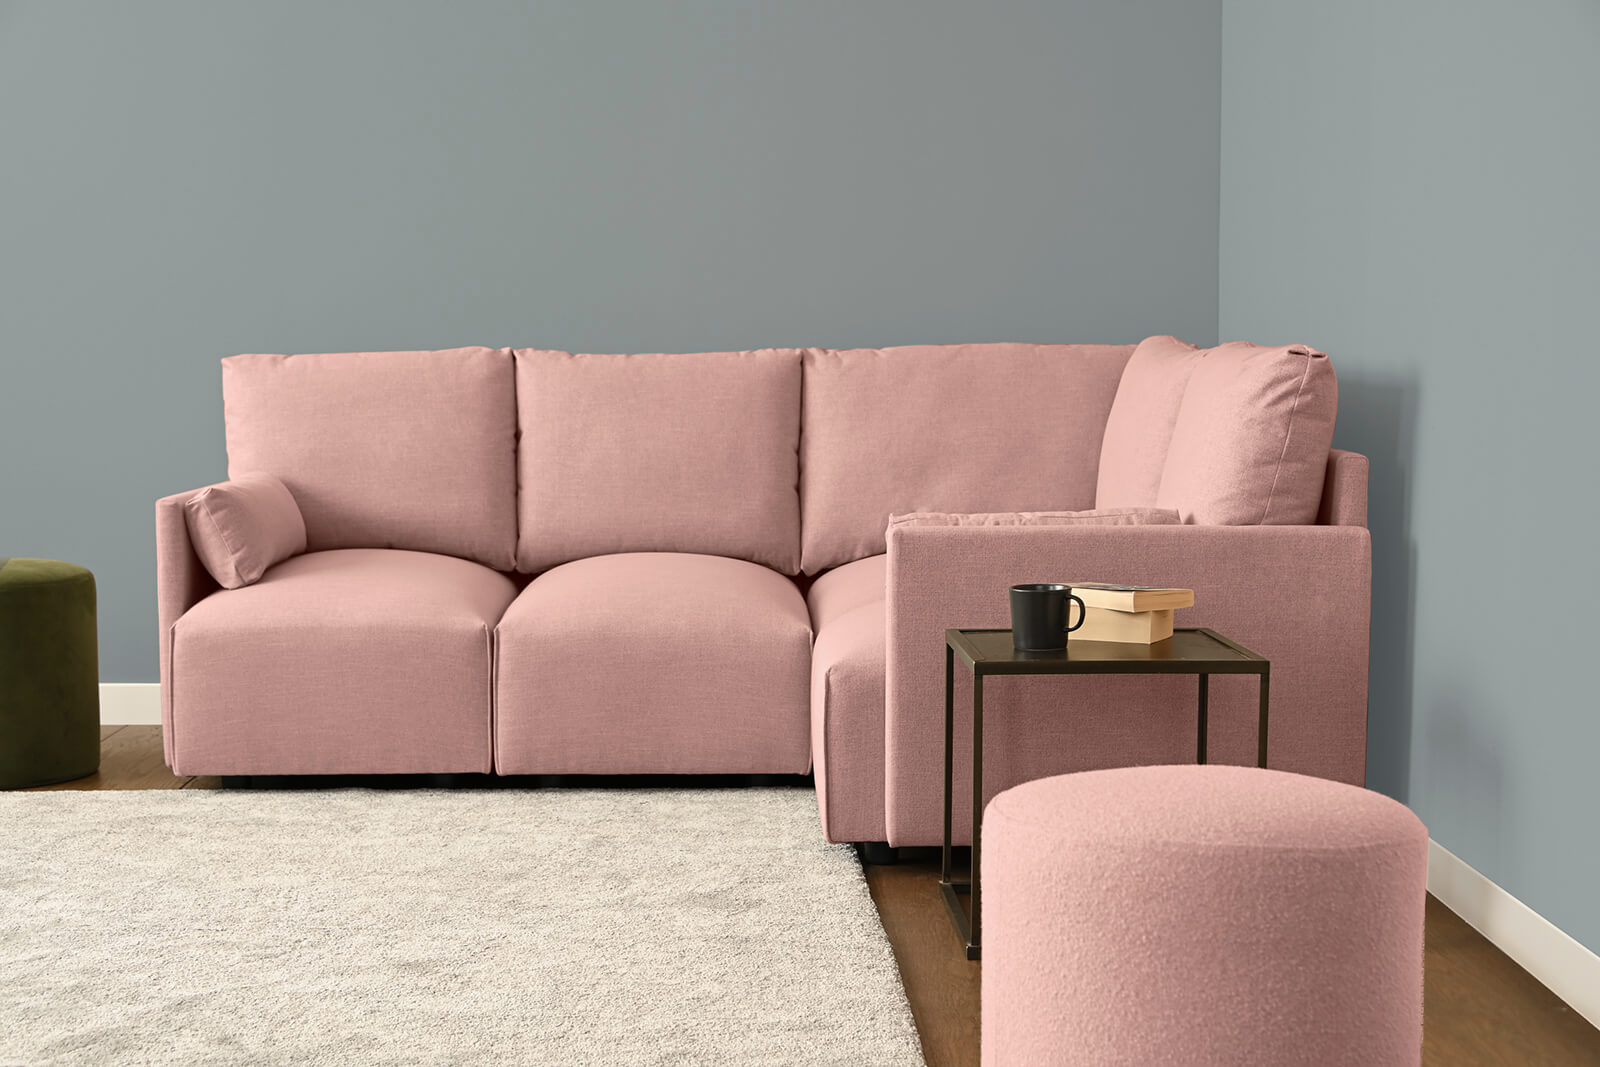 HB04-small-corner-sofa-front-rosewater-3x2-lifestyle